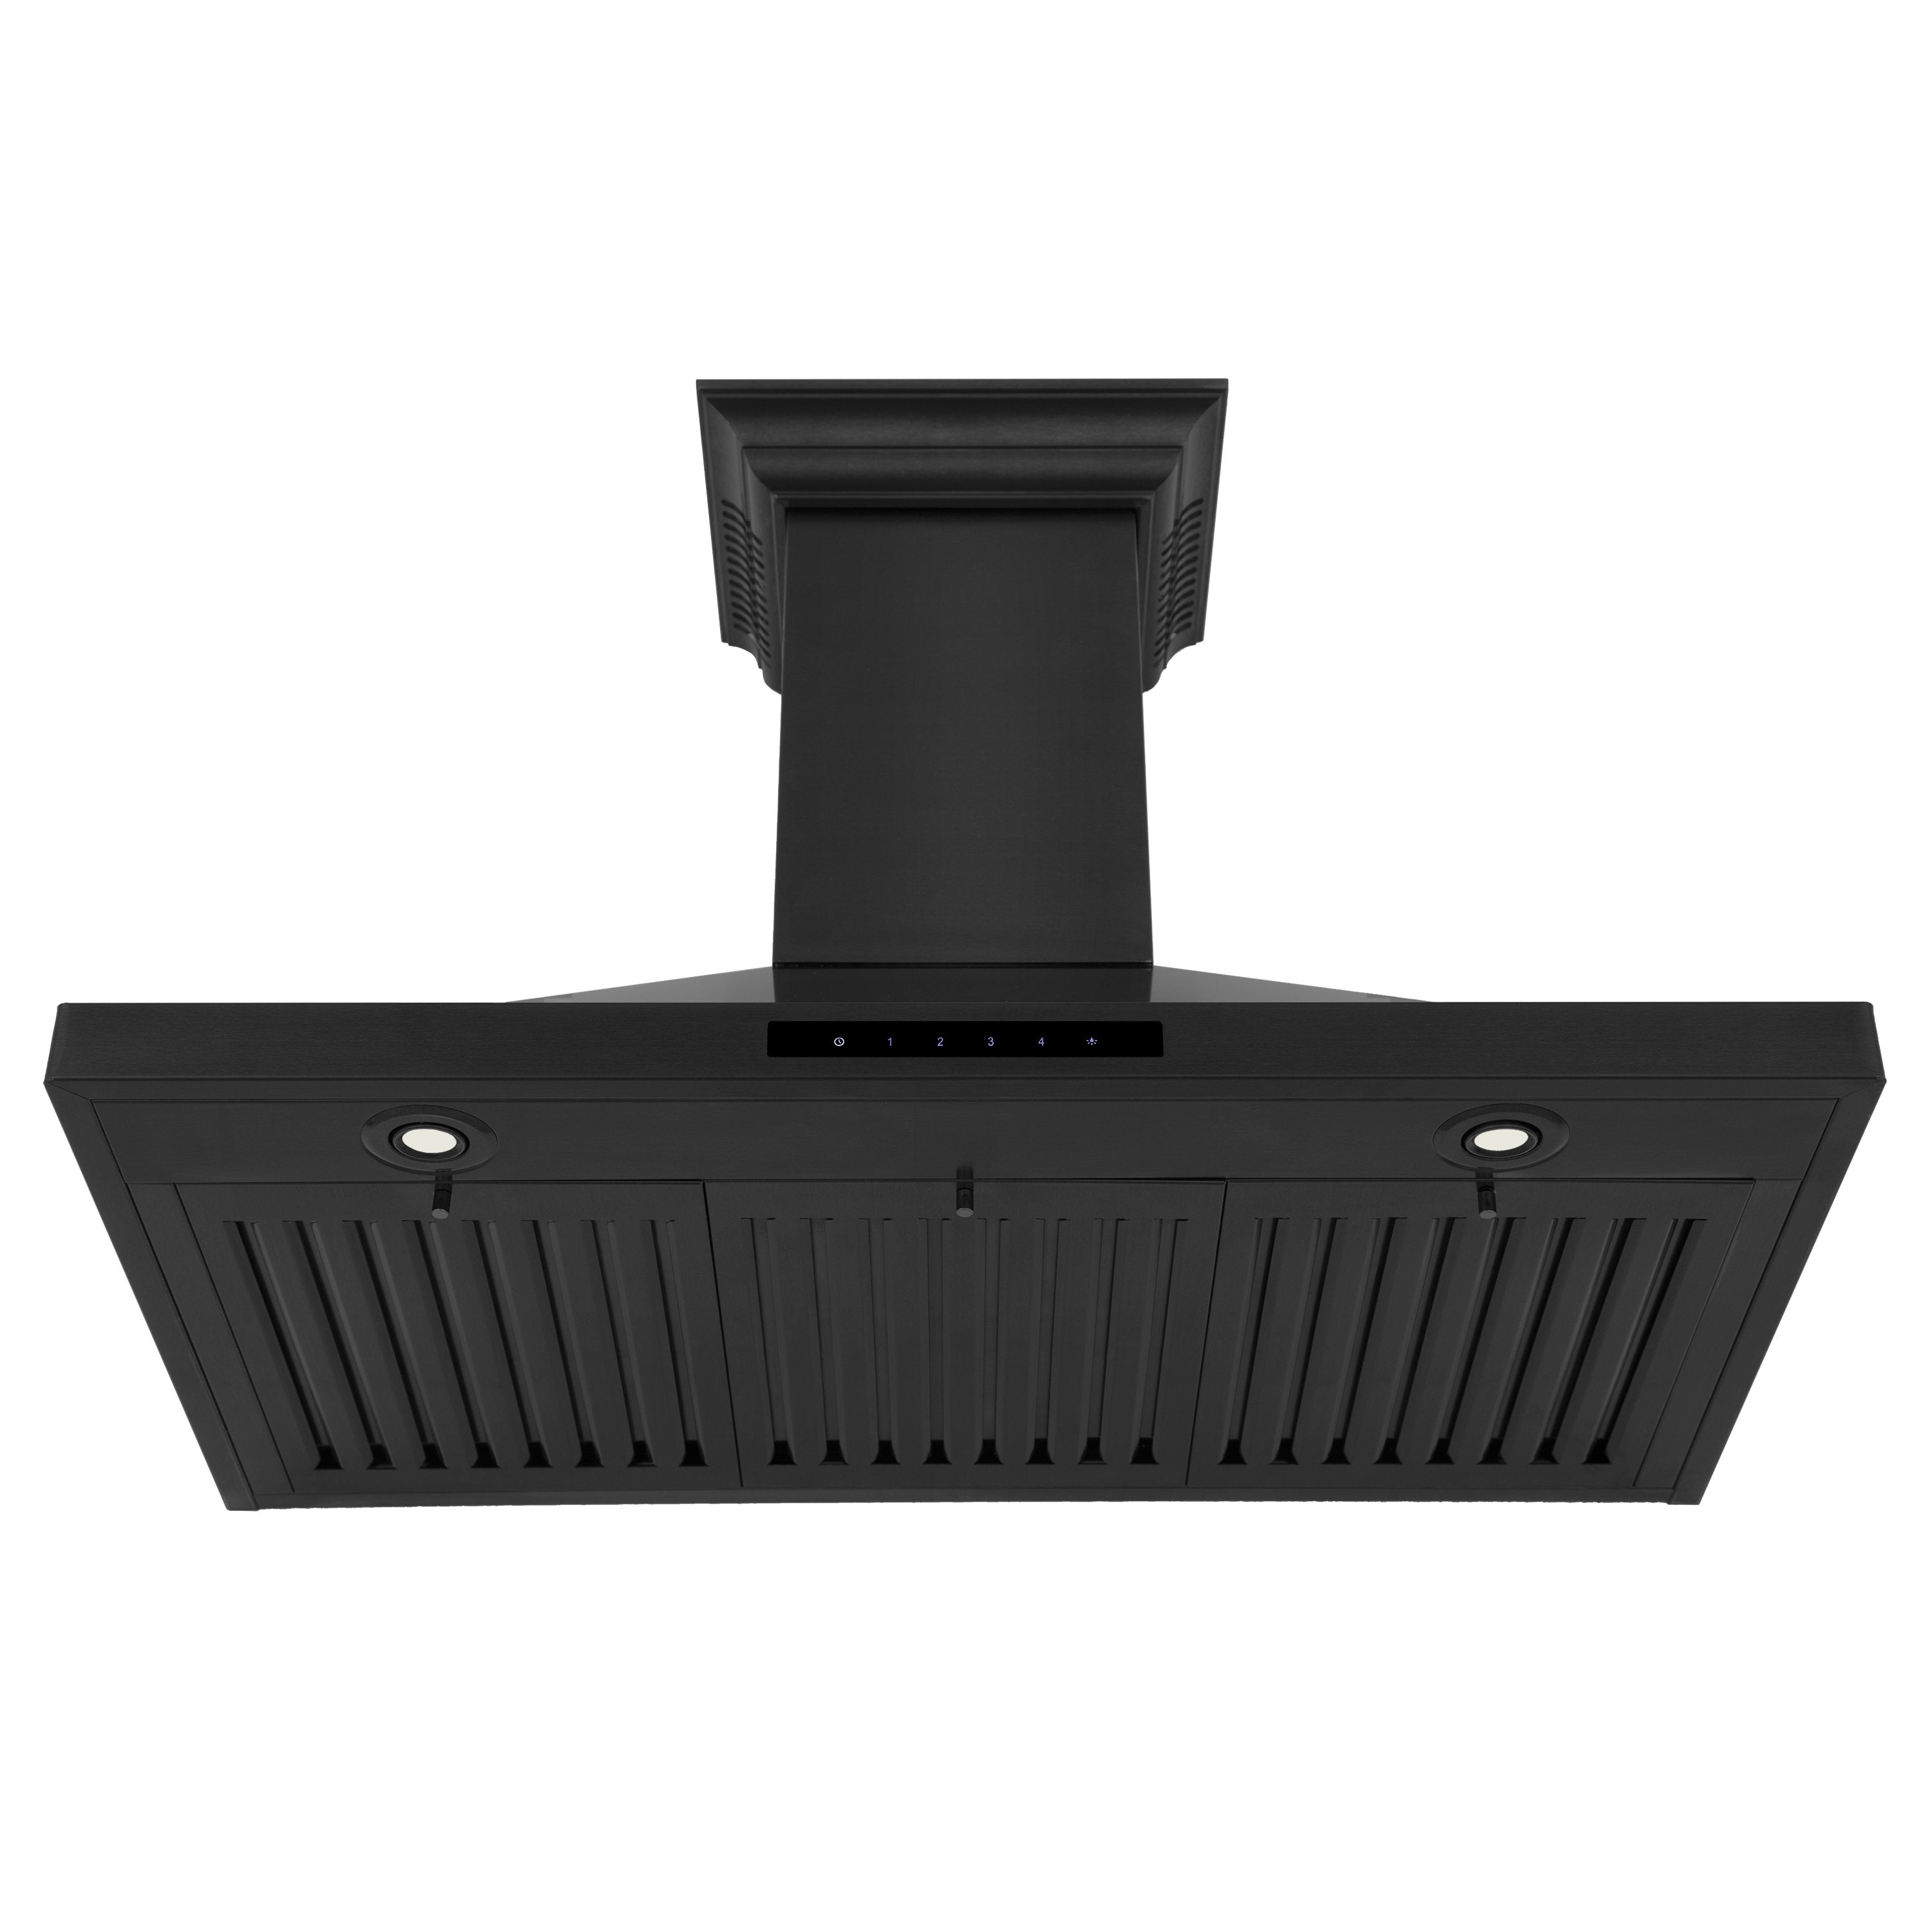 48" ZLINE CrownSound‚ Ducted Vent Wall Mount Range Hood in Black Stainless Steel with Built-in Bluetooth Speakers (BSKBNCRN-BT-48)